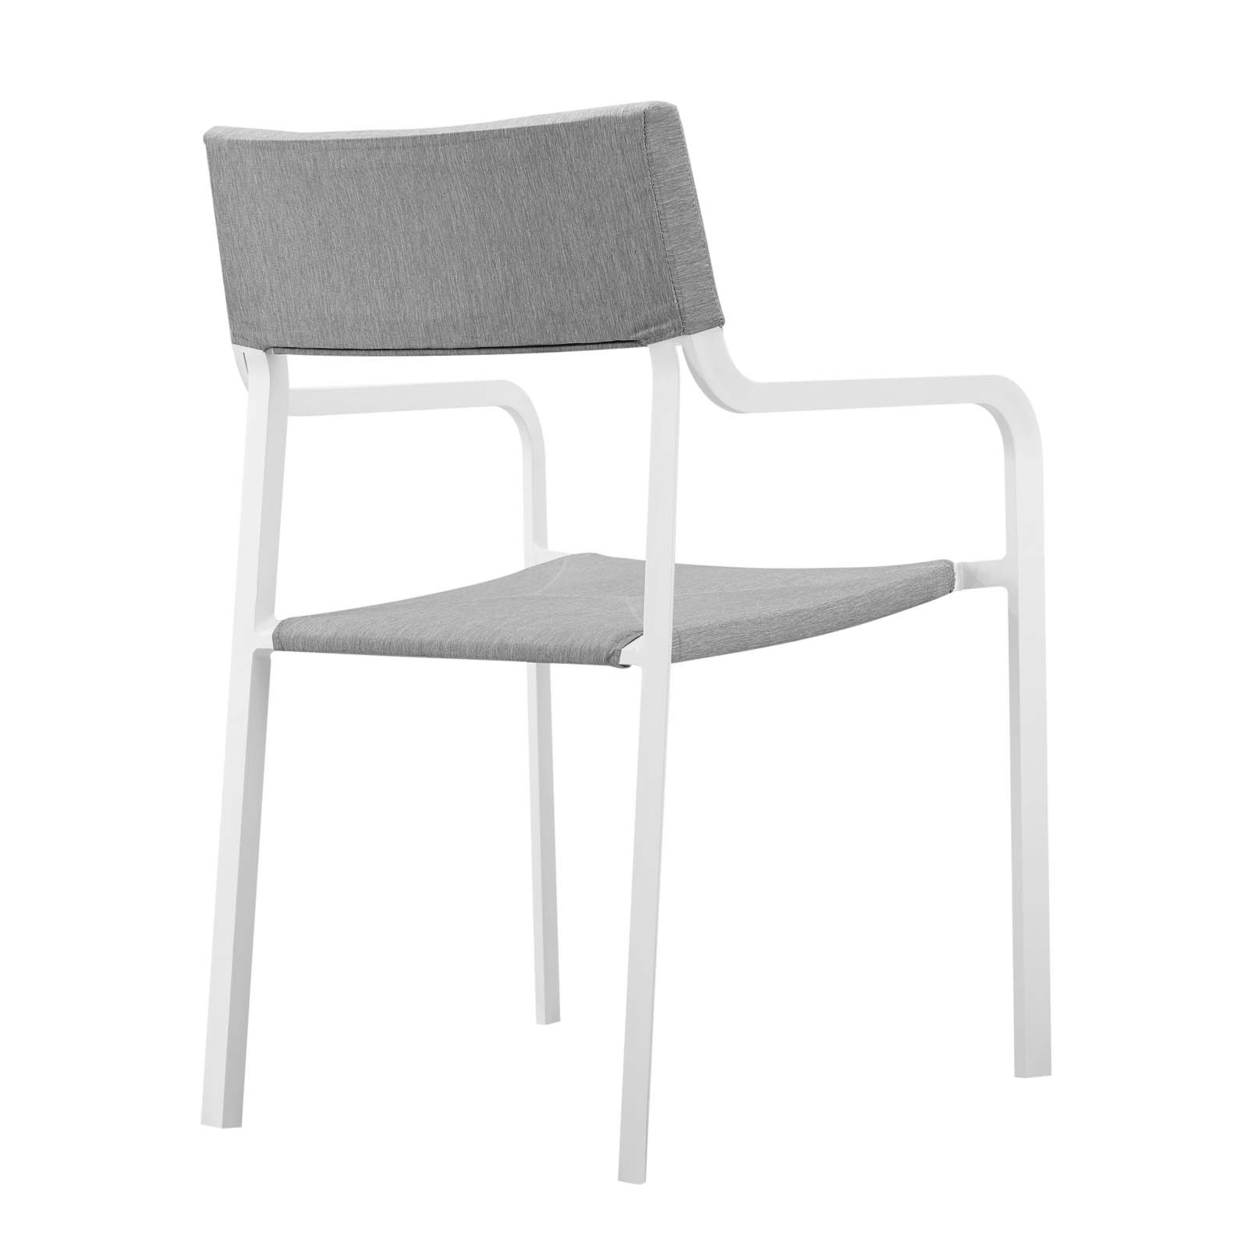 Raleigh Stackable Outdoor Patio Aluminum Dining Armchair, White Gray